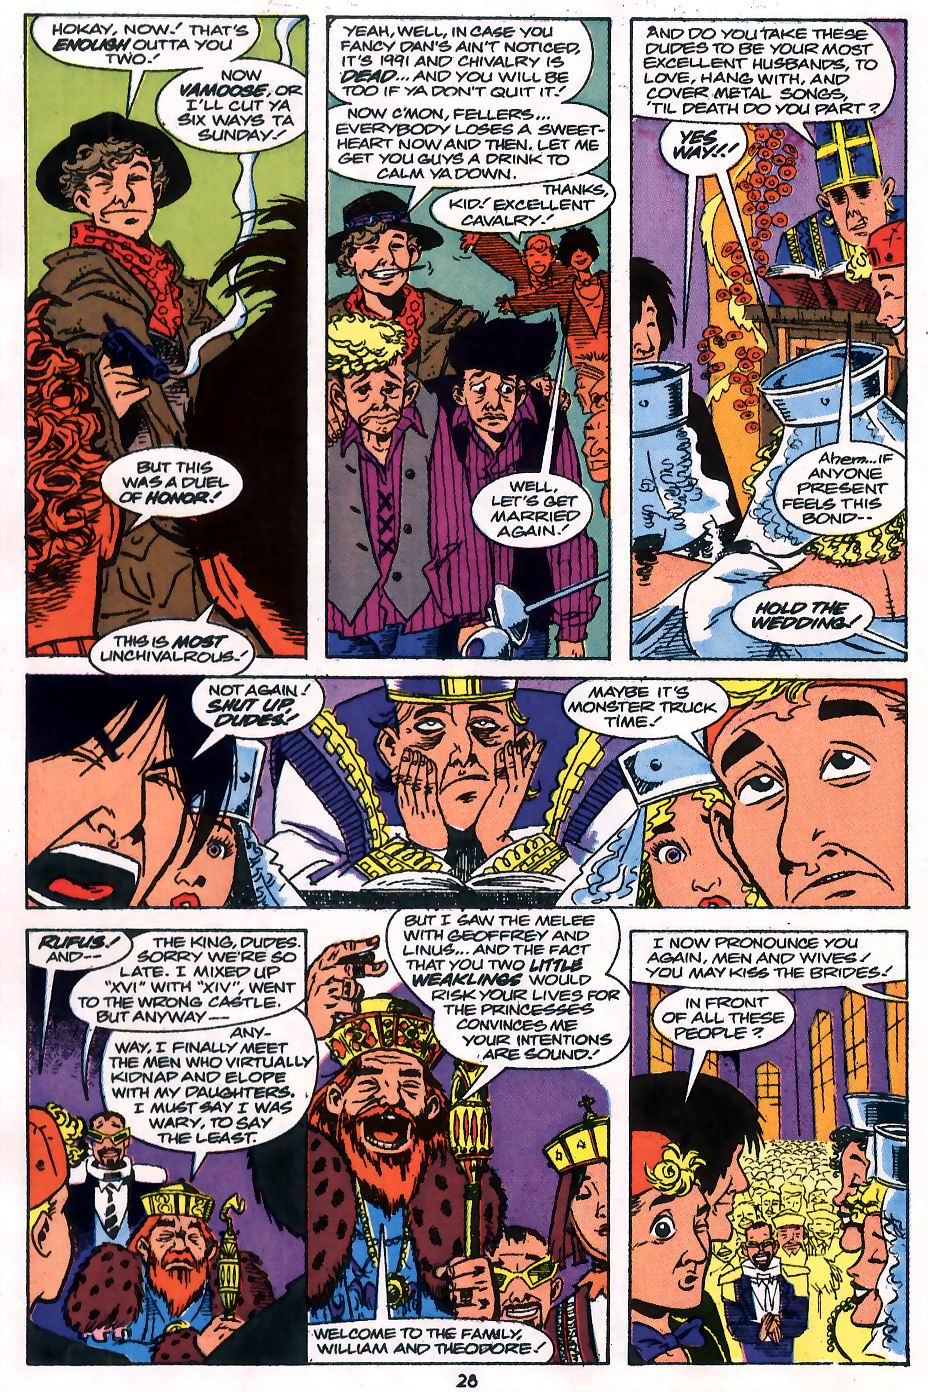 Read online Bill & Ted's Excellent Comic Book comic -  Issue #1 - 21